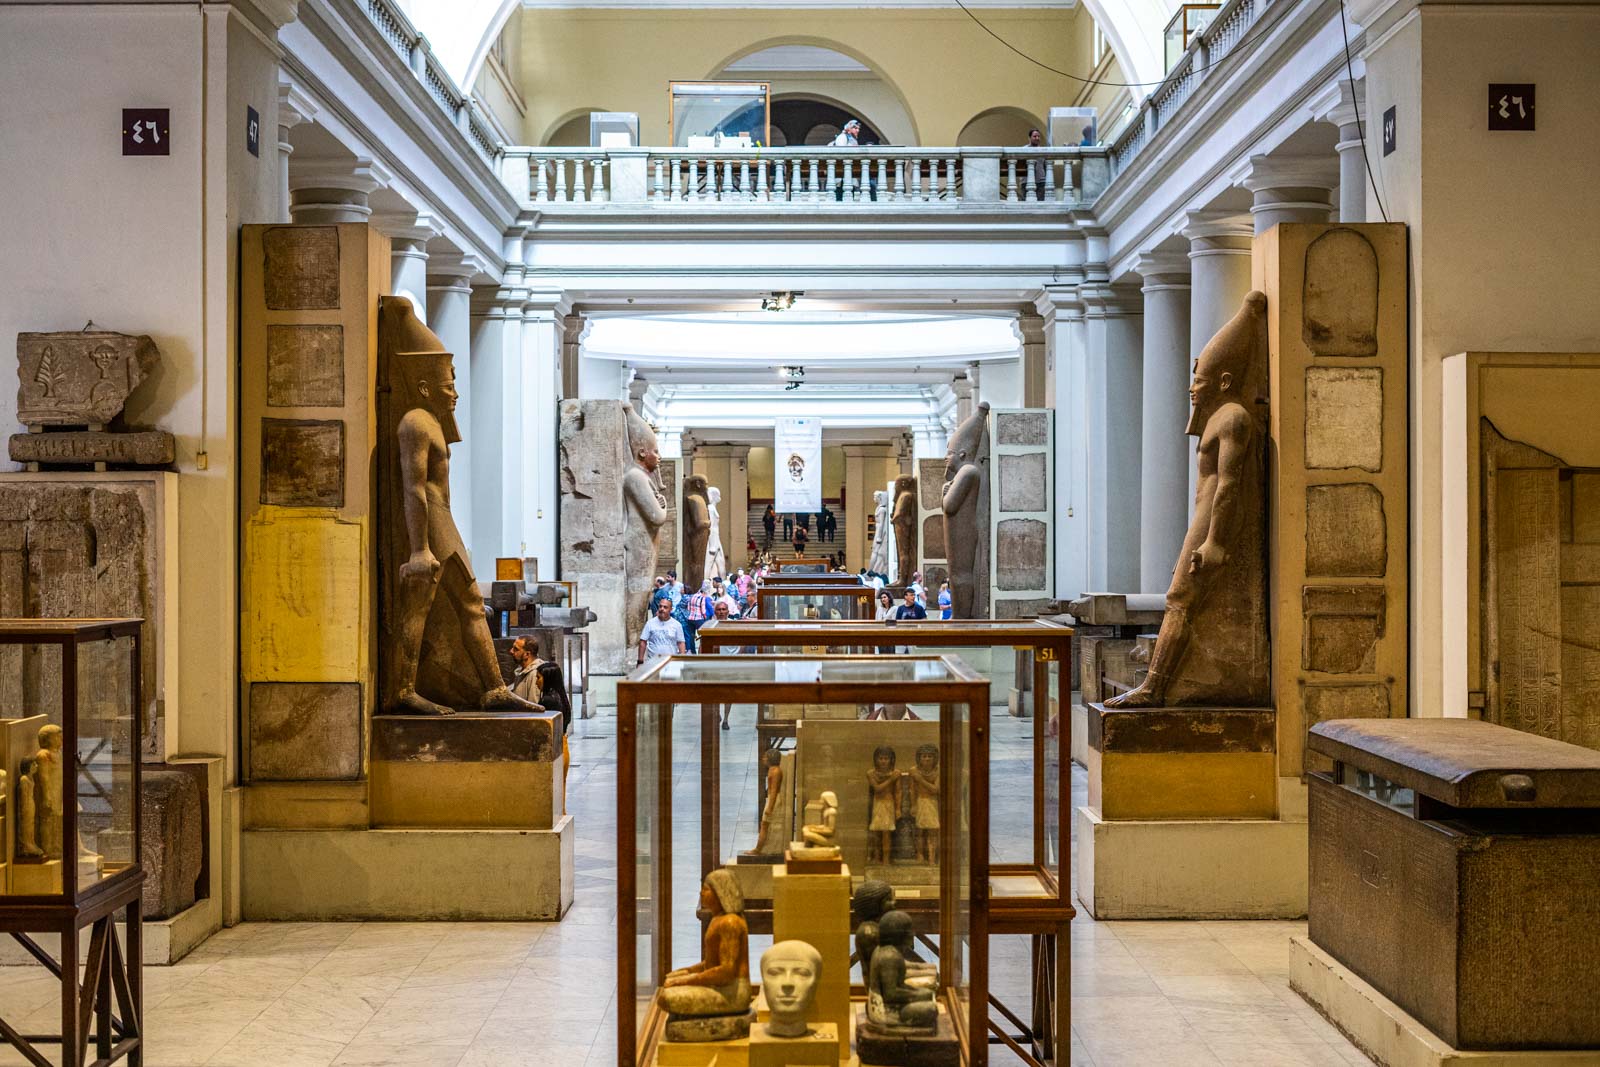 The Egyptian Museum Cairo In Egypt What To Expect When You Visit